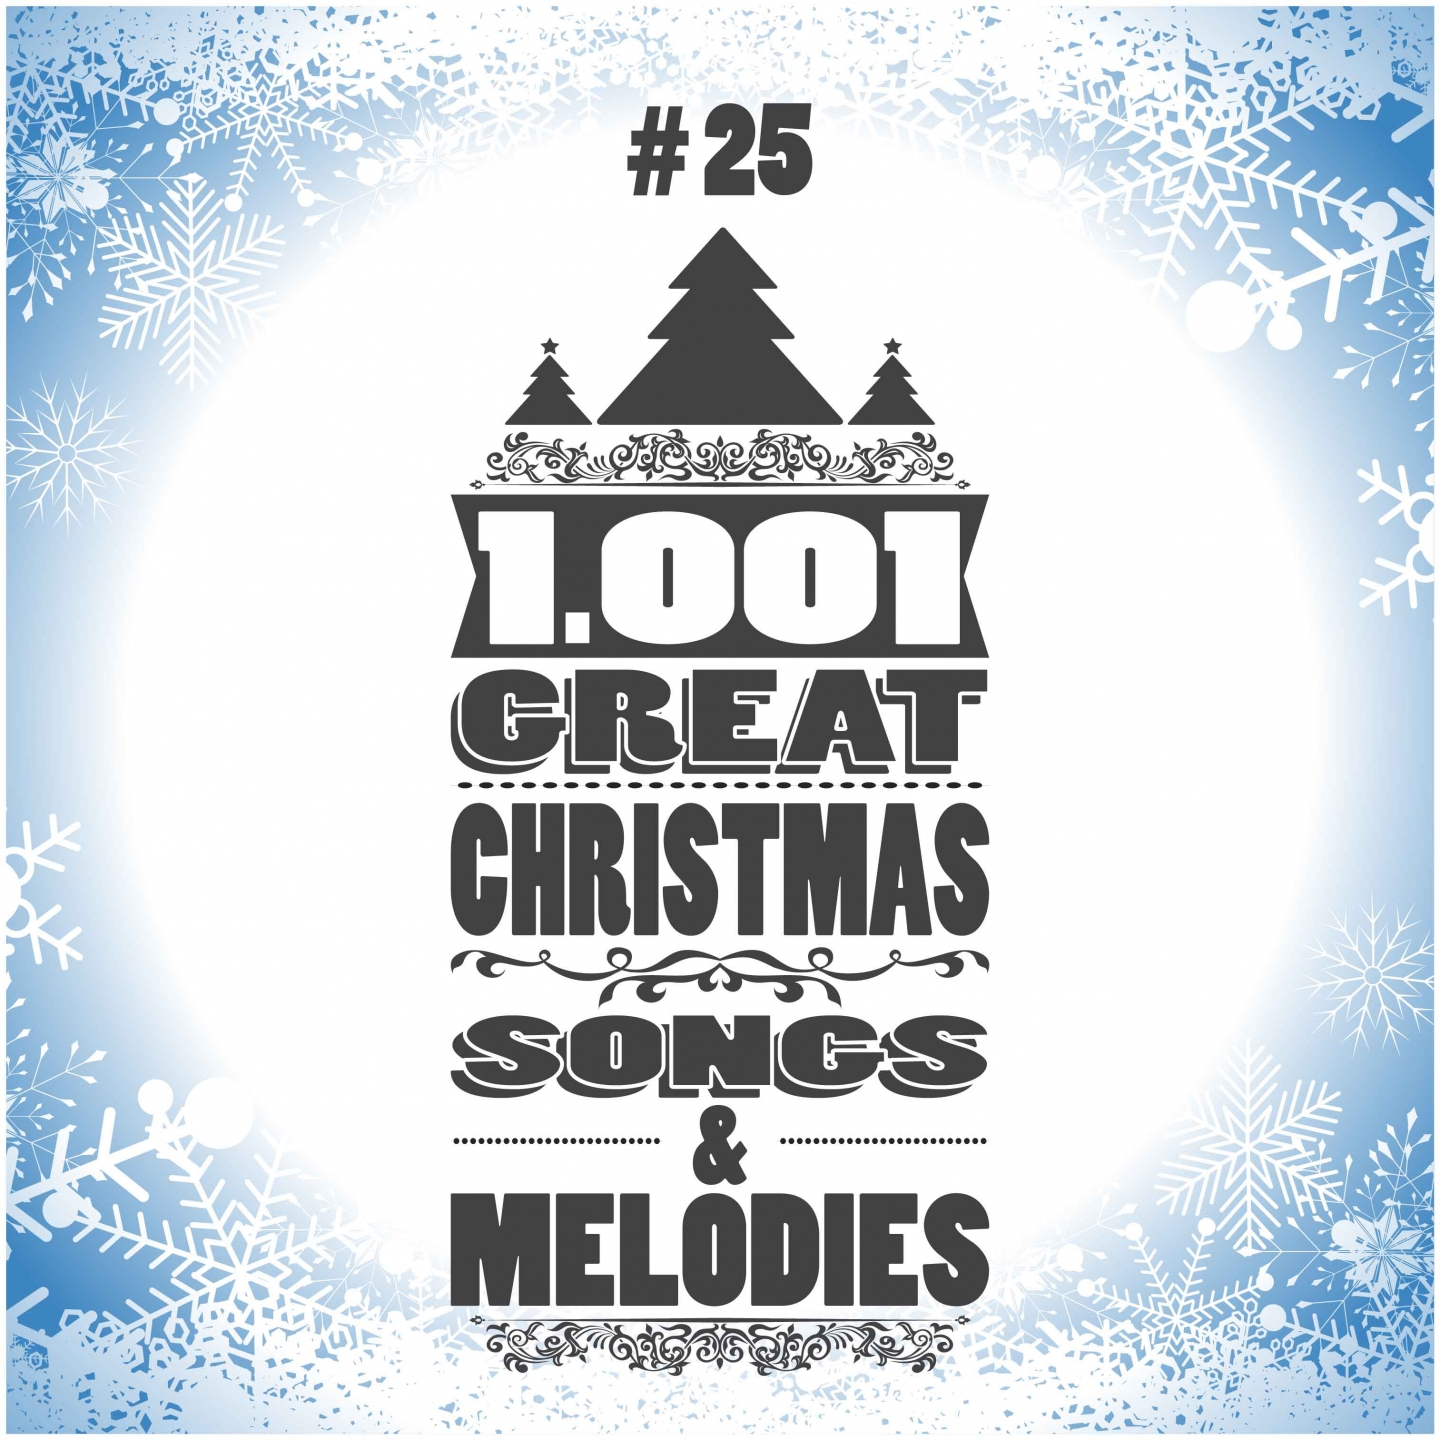 1001 Great Christmas Songs & Melodies, Vol. 25